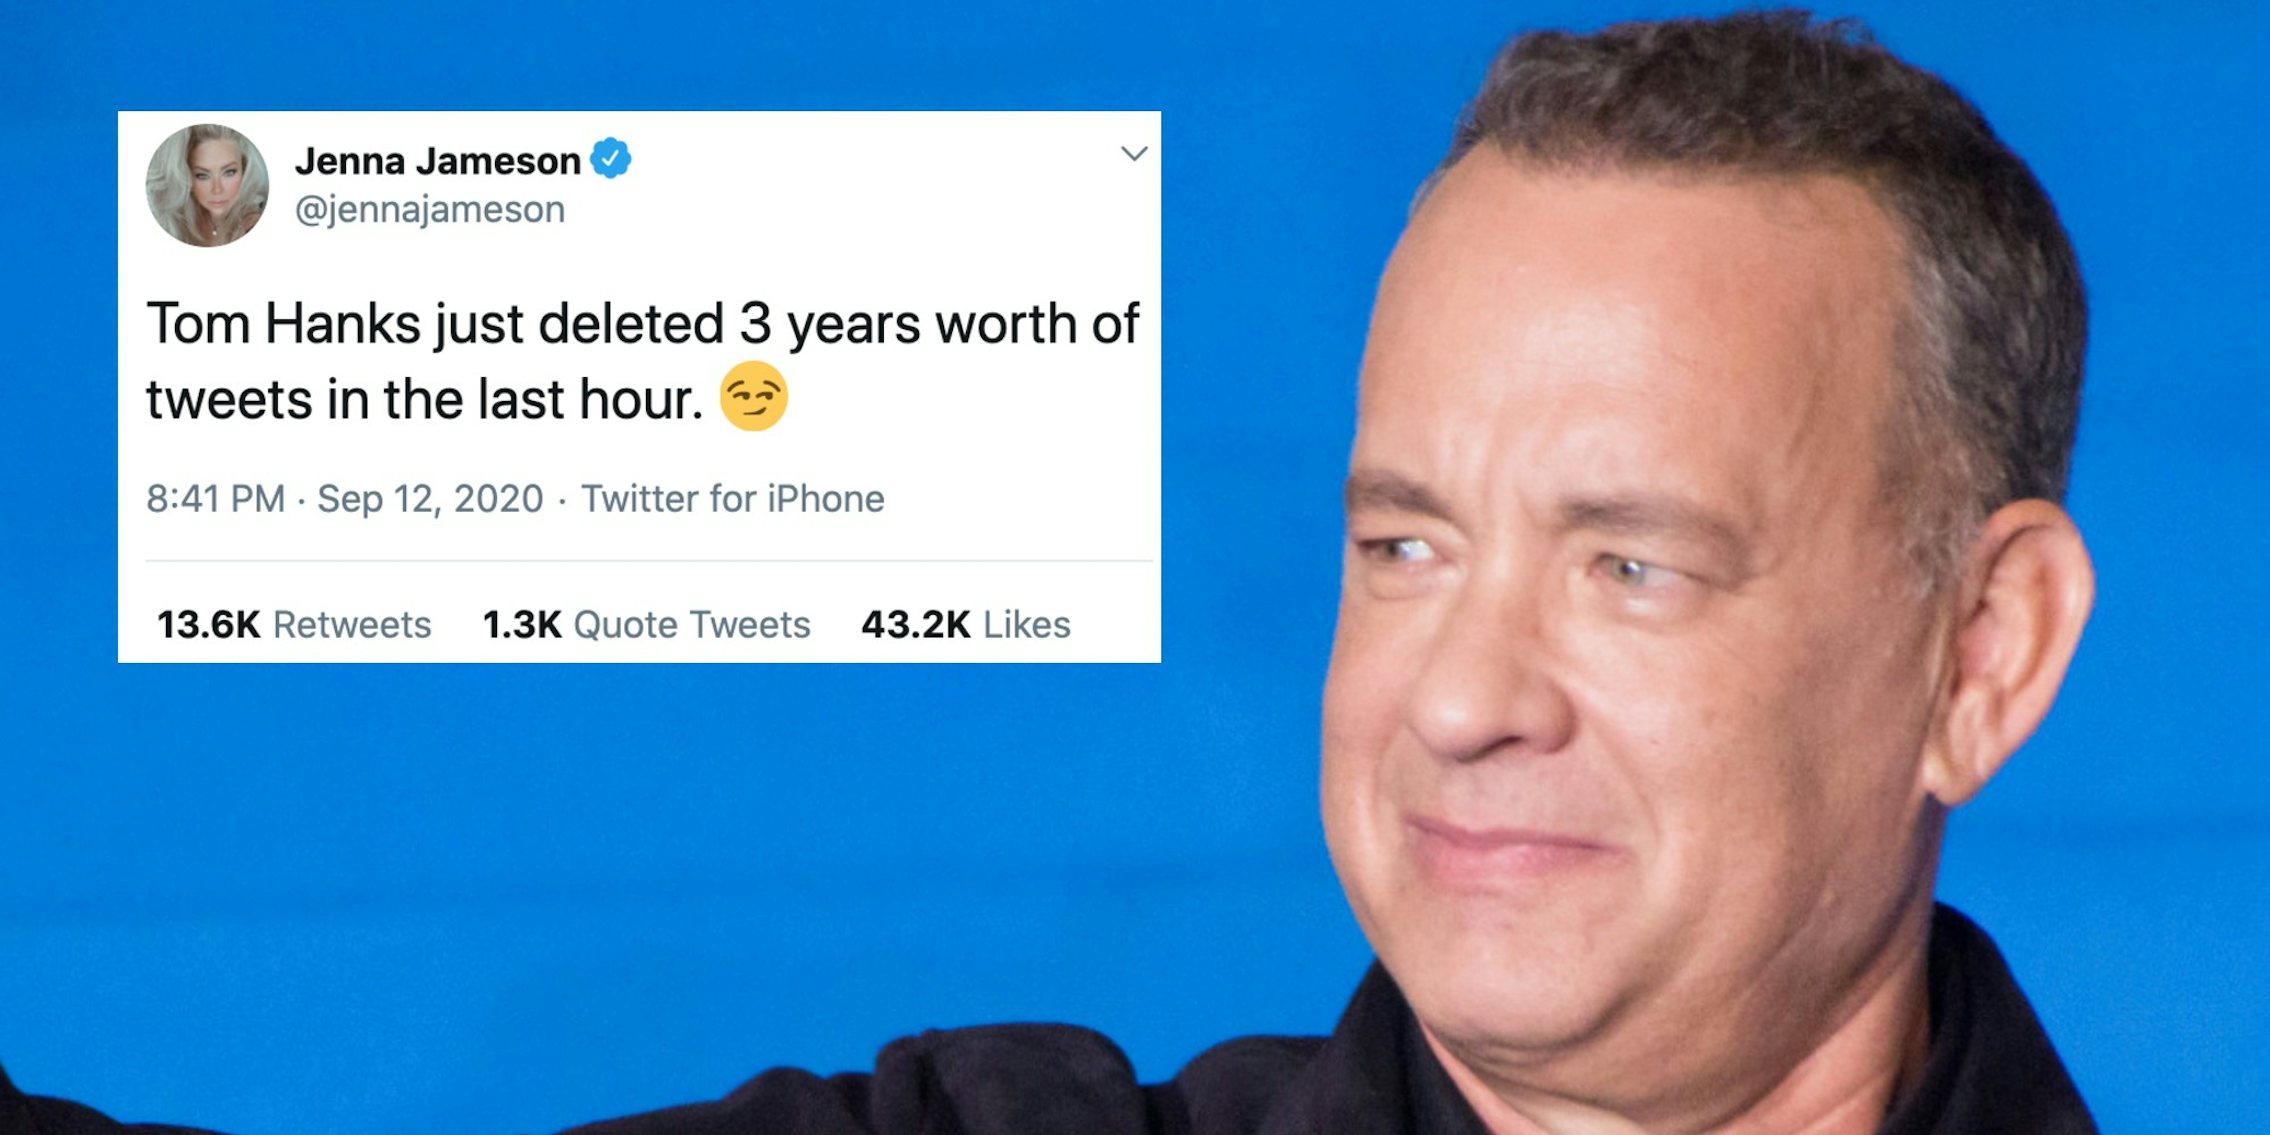 Hollywood actor Tom Hanks next to a tweet from Jenna Jameson